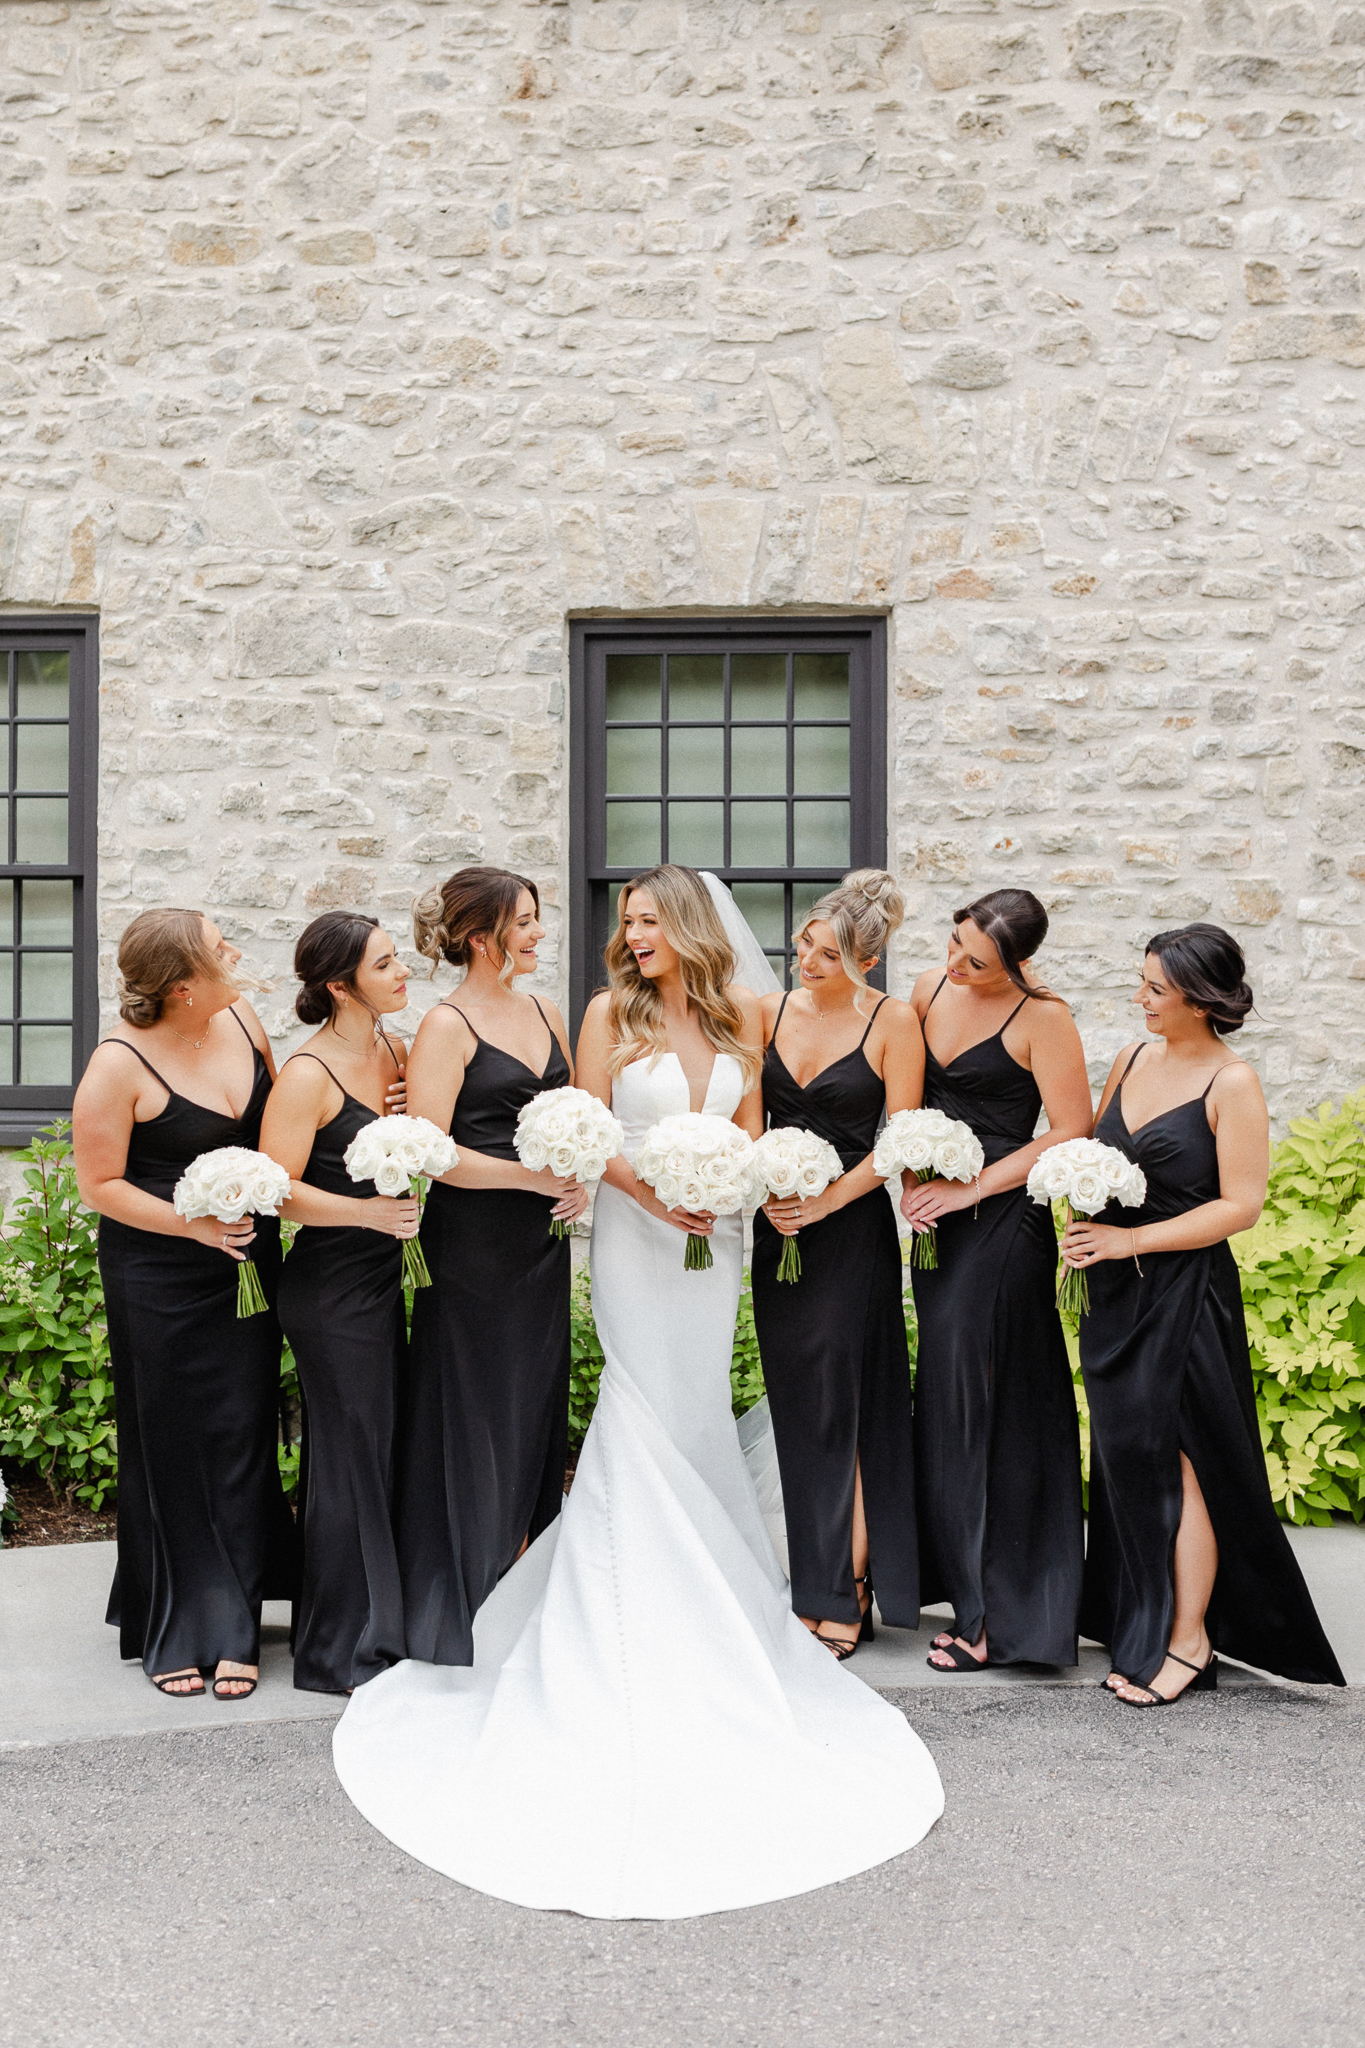 Bridesmaids elegantly dressed in black attire, holding beautiful white bouquets with the bride.